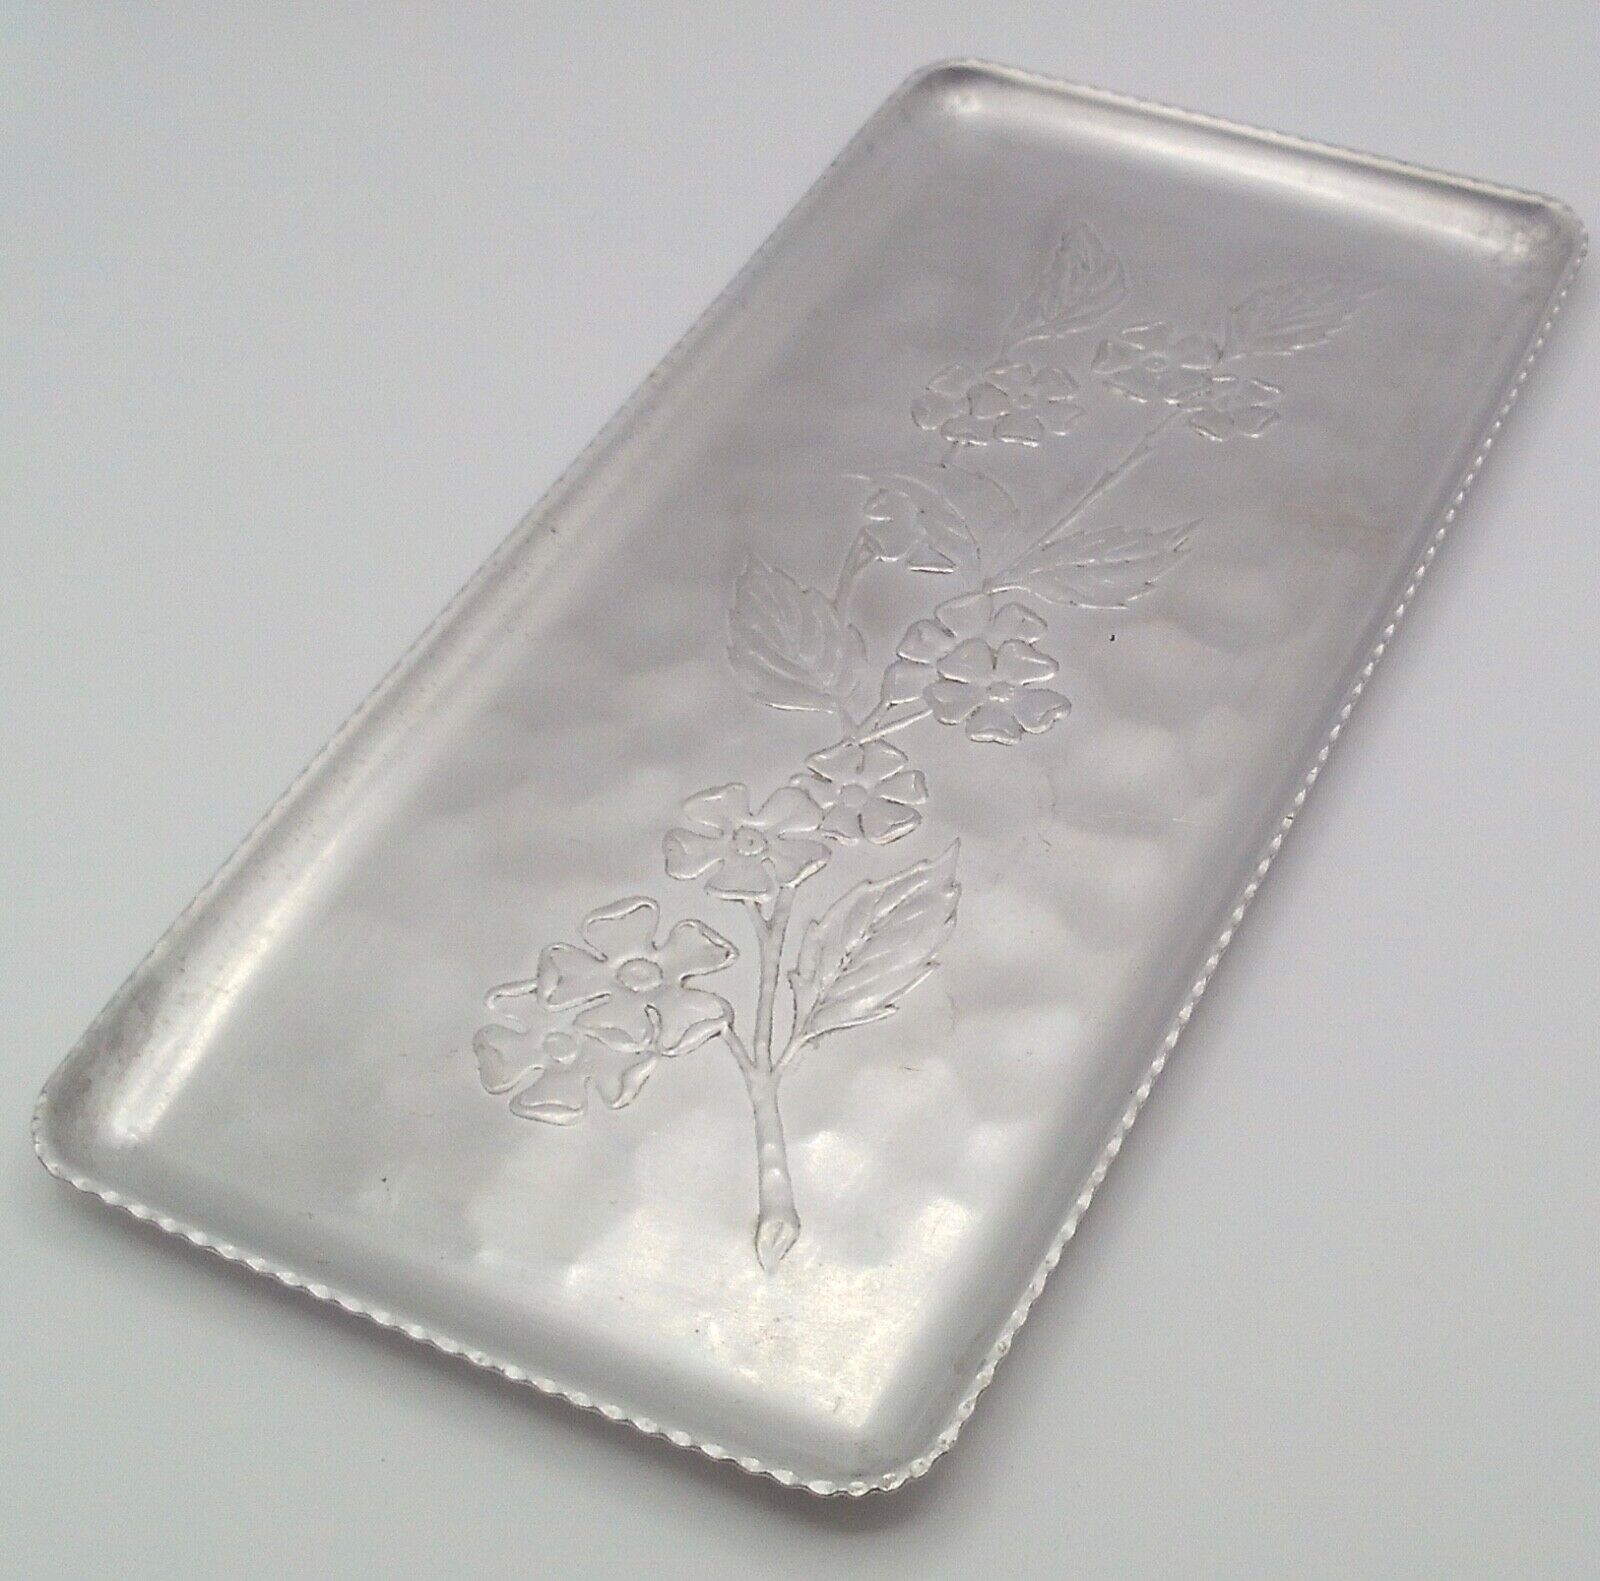 Vintage Hammered Embossed Aluminum Serving Tray Floral Pattern Scalloped Edge